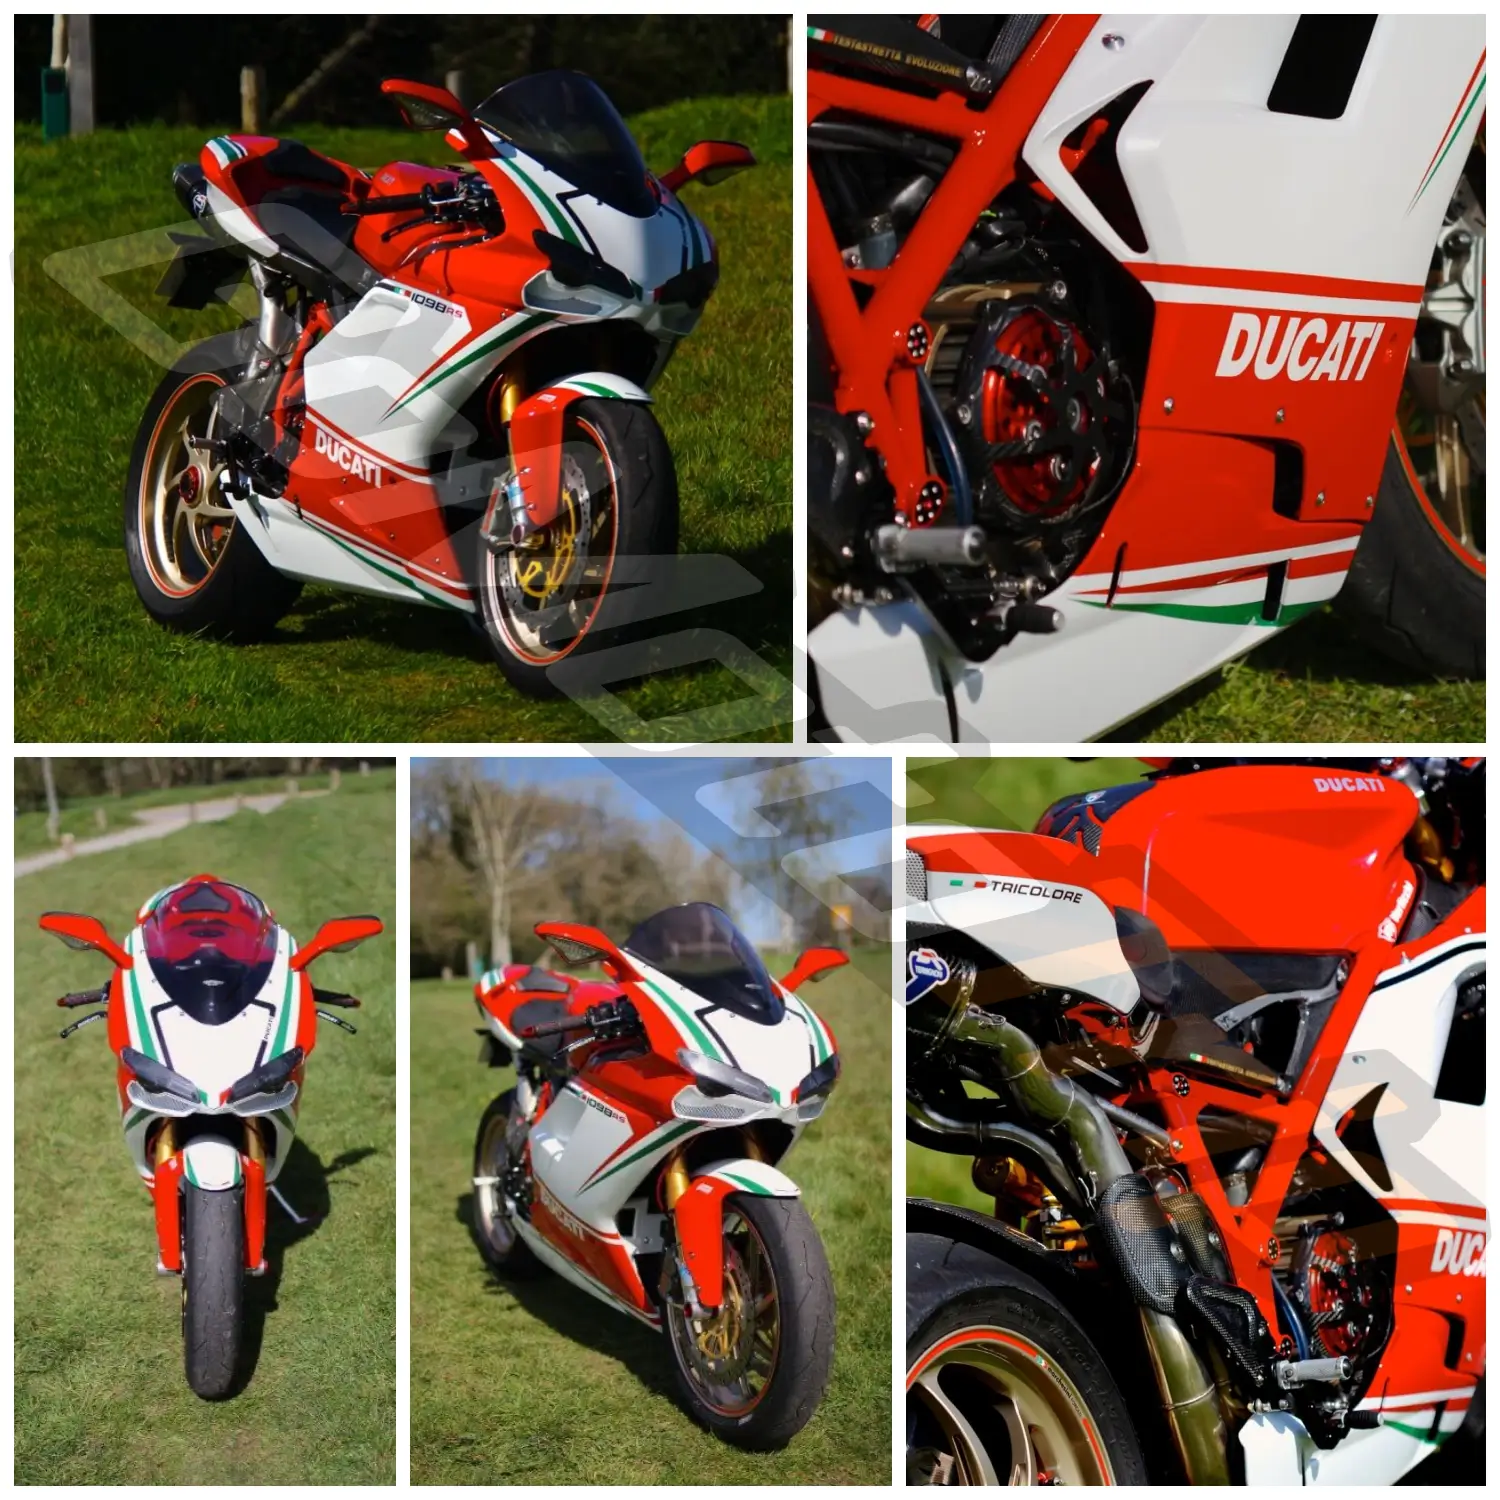 Rider Review Jamie Ducati 1098 Rs Panigale Tricolore Fairing 2